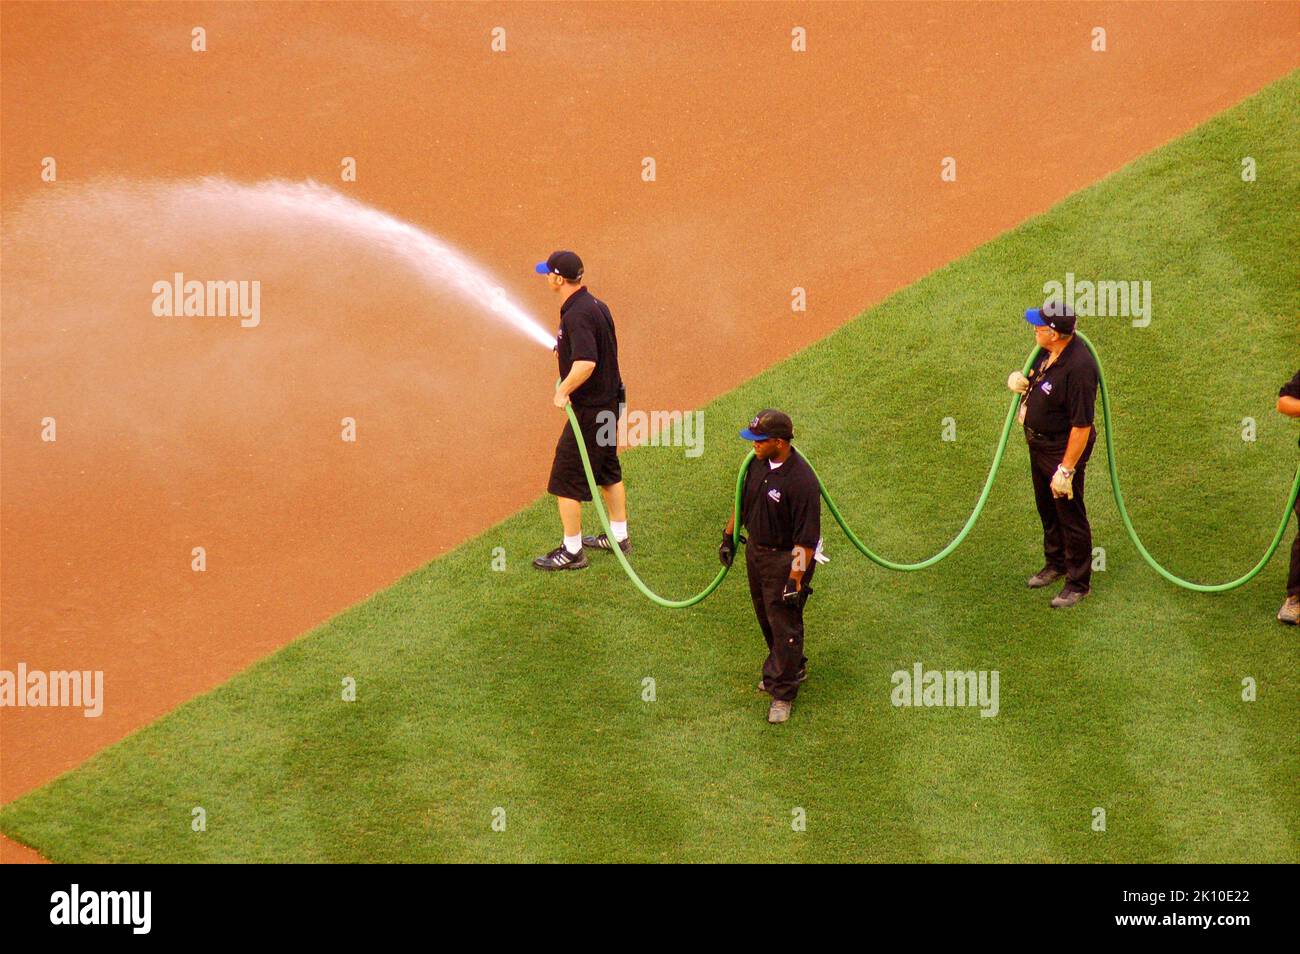 A grounds crew Team prepares the baseball field by watering down the infield dirt with a hose prior to the game's start Stock Photo